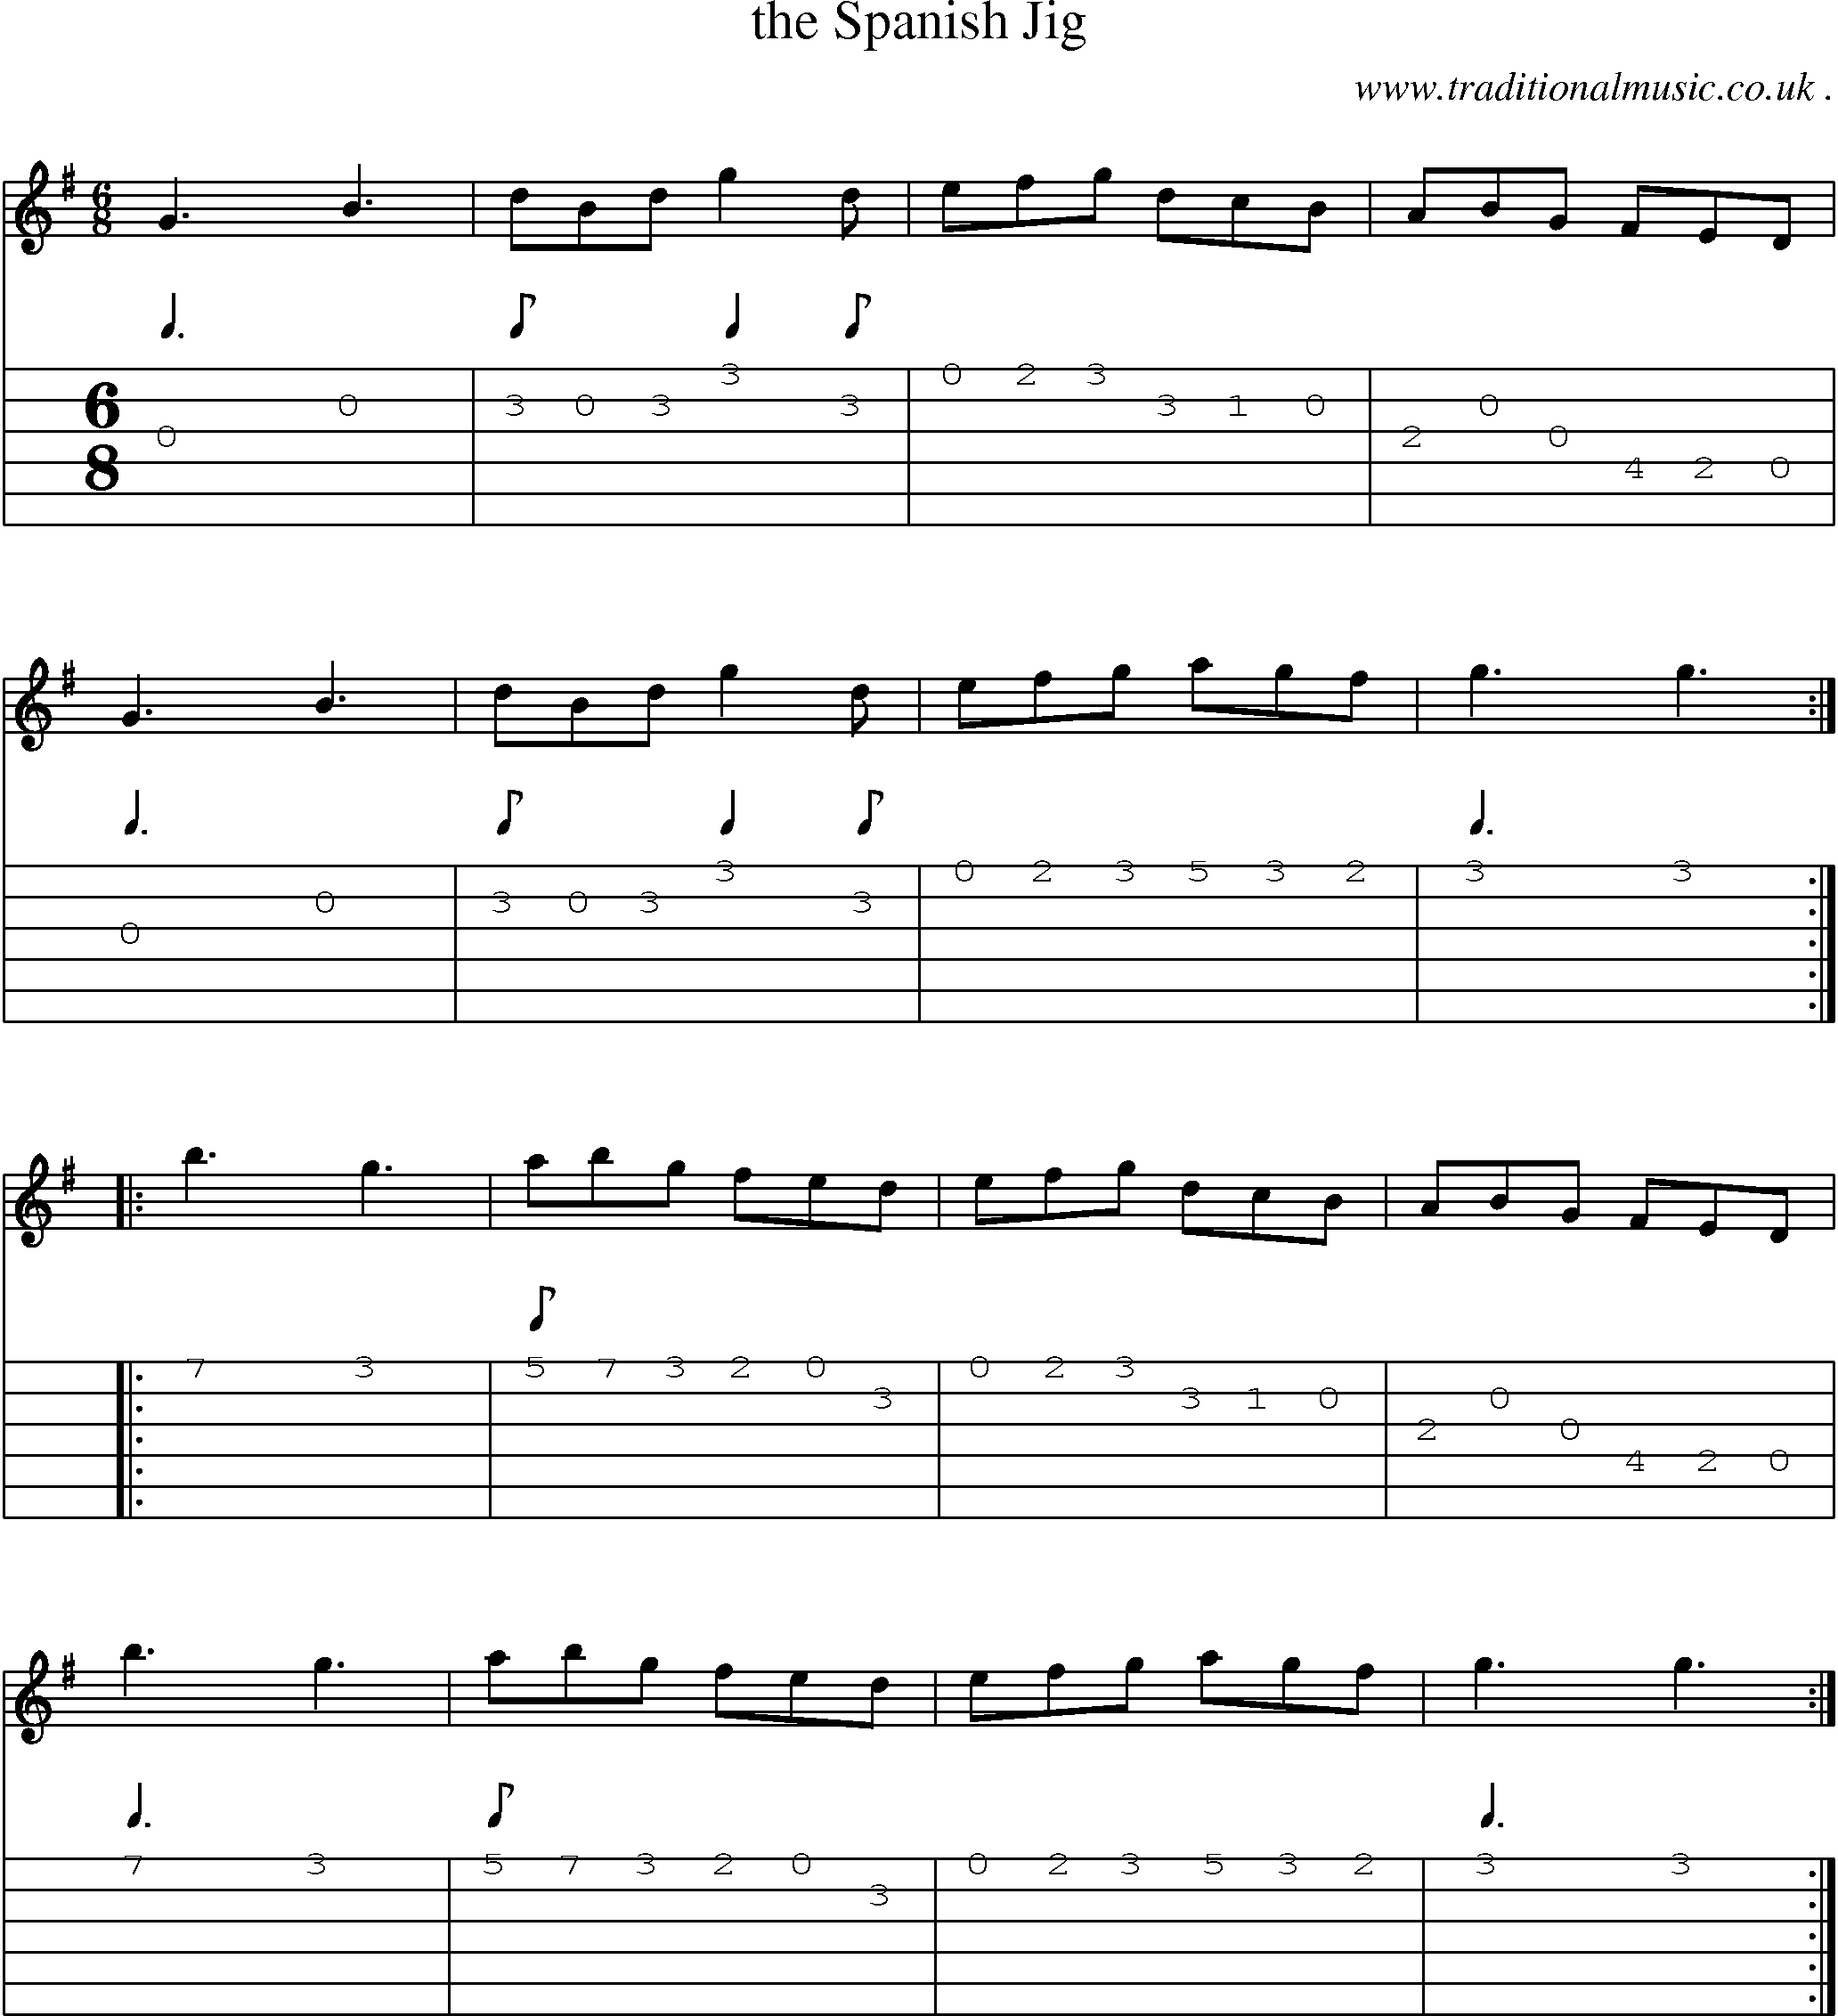 Sheet-Music and Guitar Tabs for The Spanish Jig